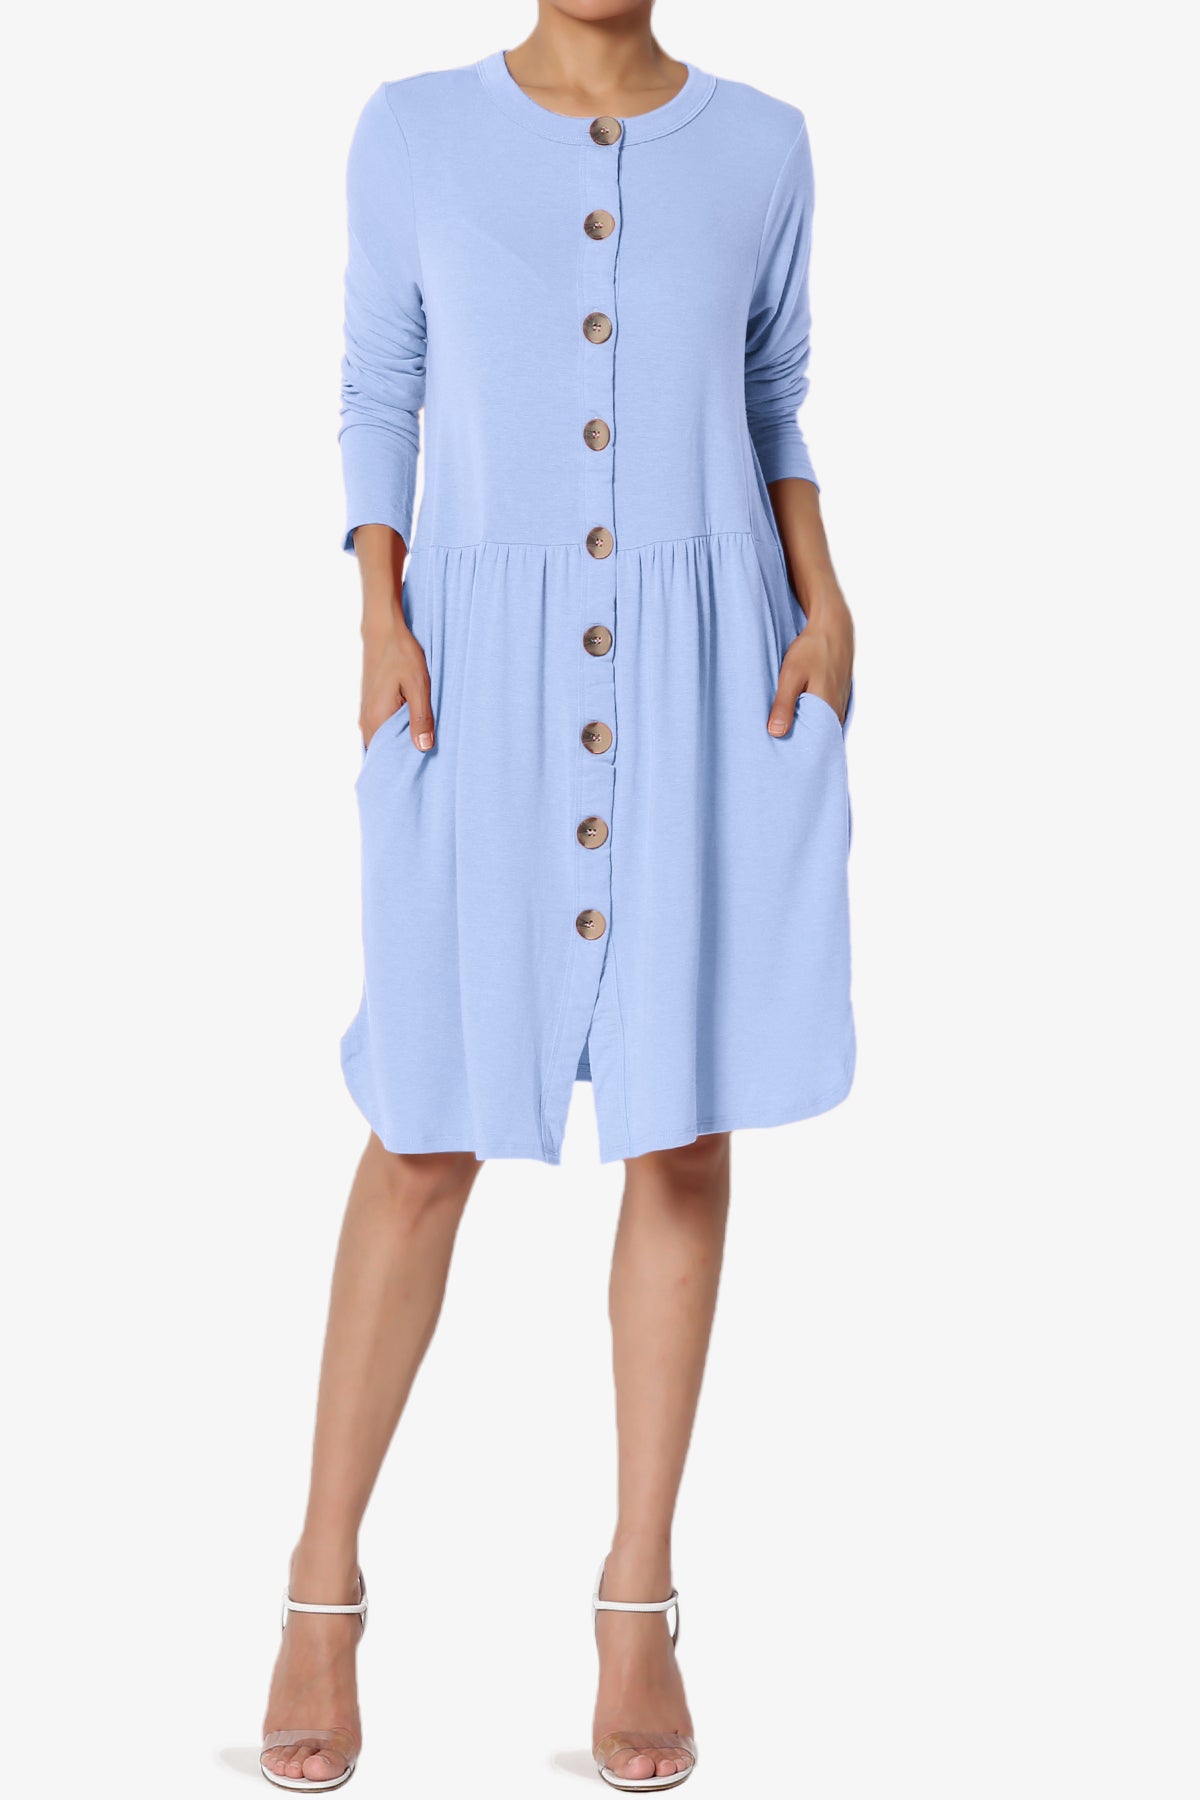 Load image into Gallery viewer, Karly Button Front Dress Cardigan LIGHT BLUE_1
